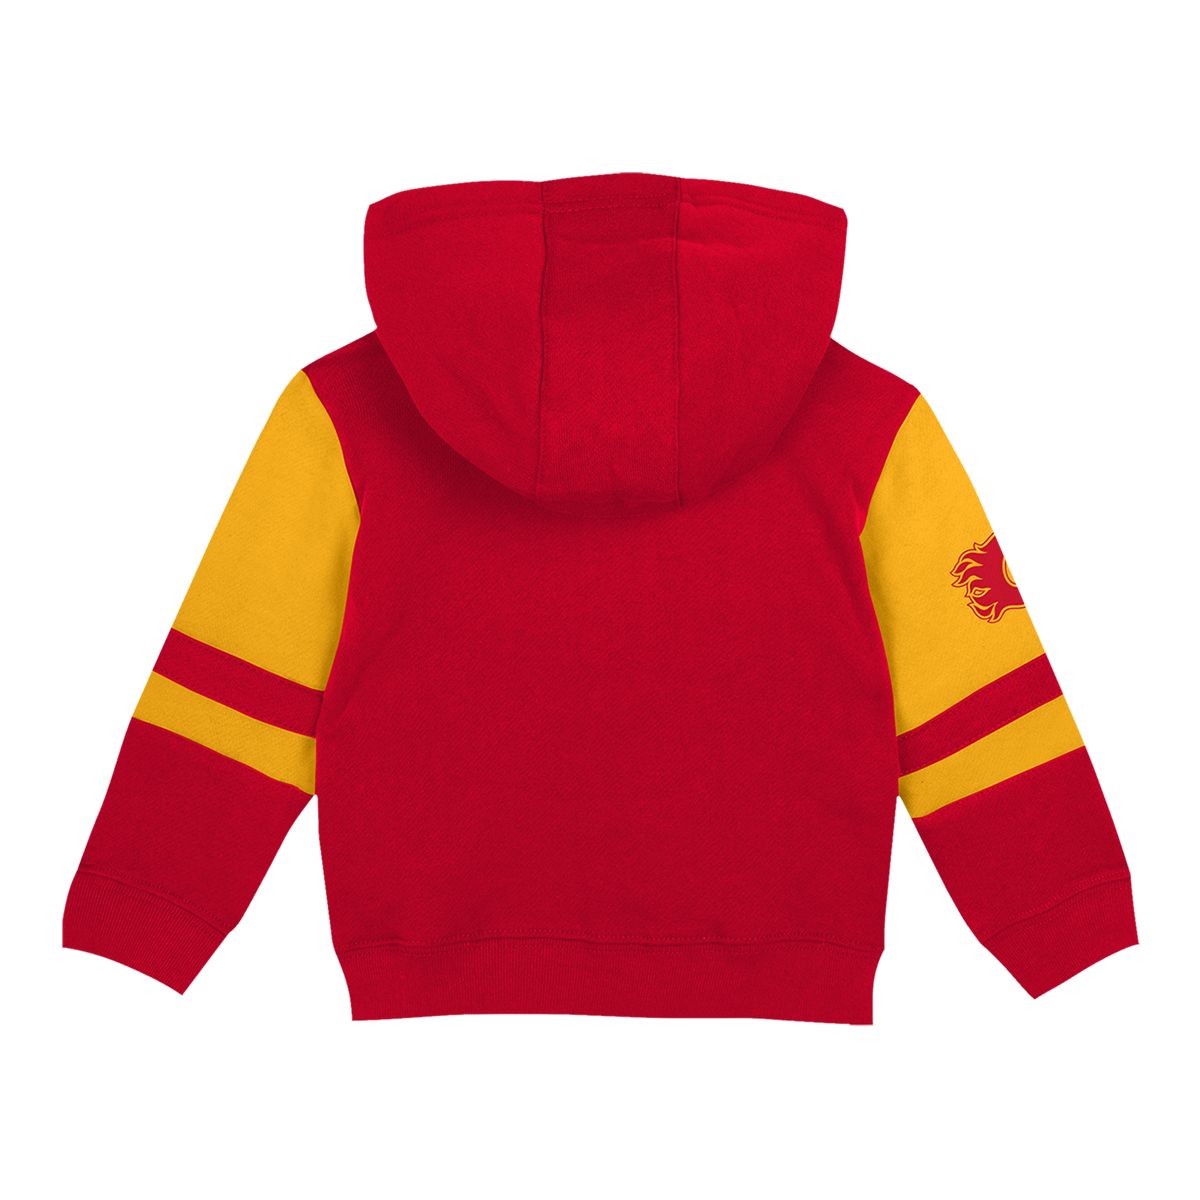 Youth Calgary Flames Outerstuff Faceoff Full Zip Hoodie